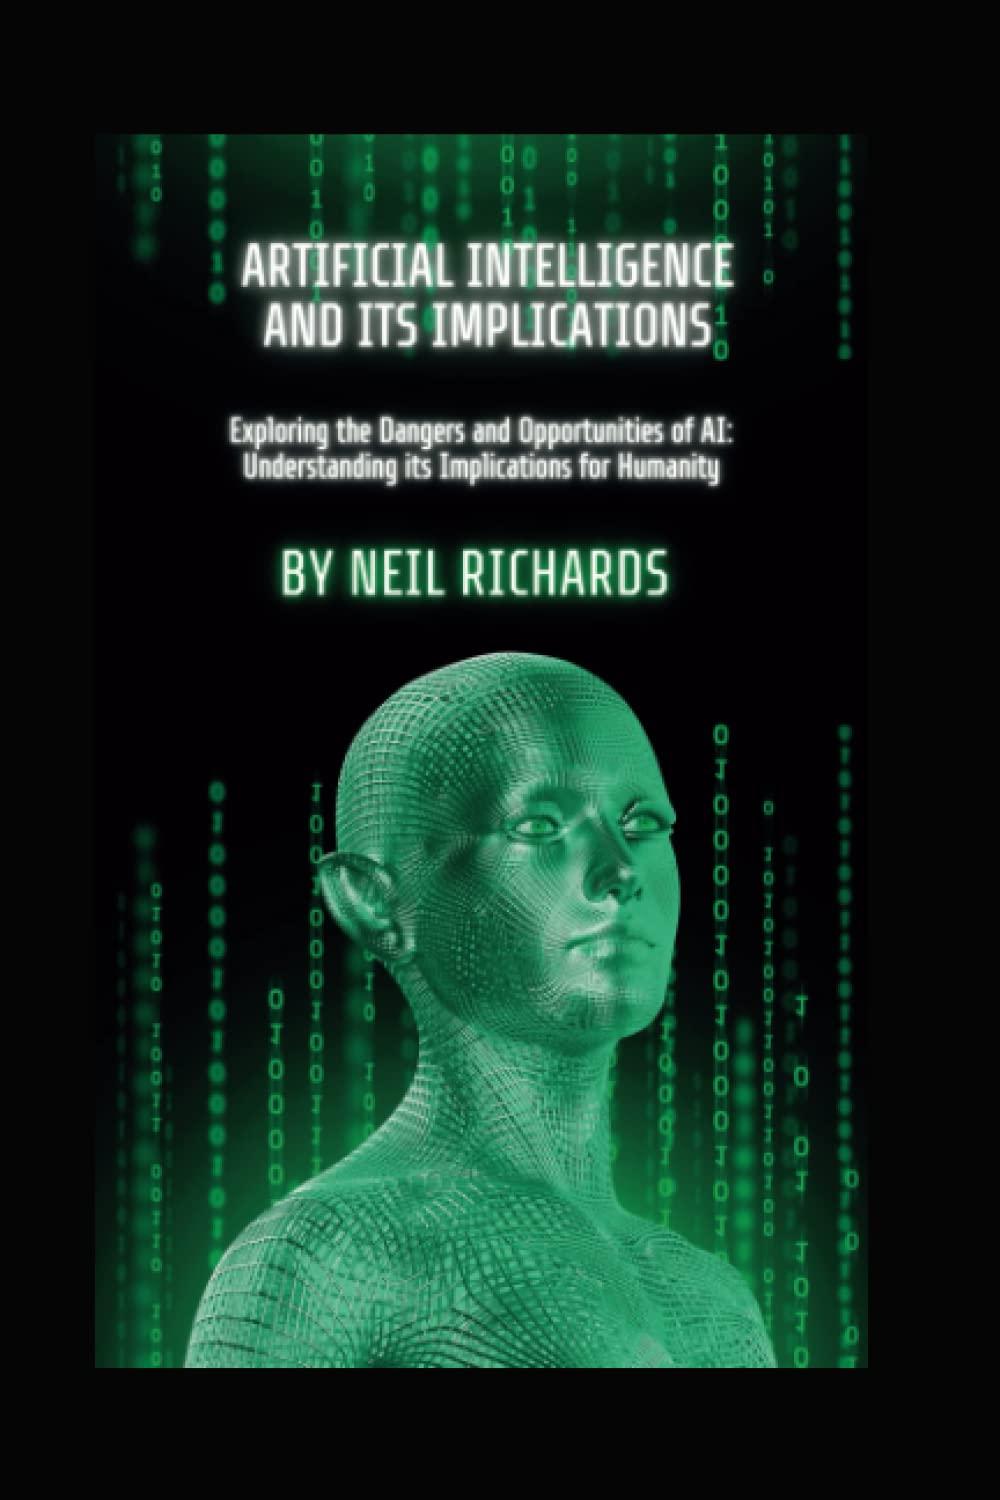 artificial intelligence and its implications exploring the dangers and opportunities of ai understanding its